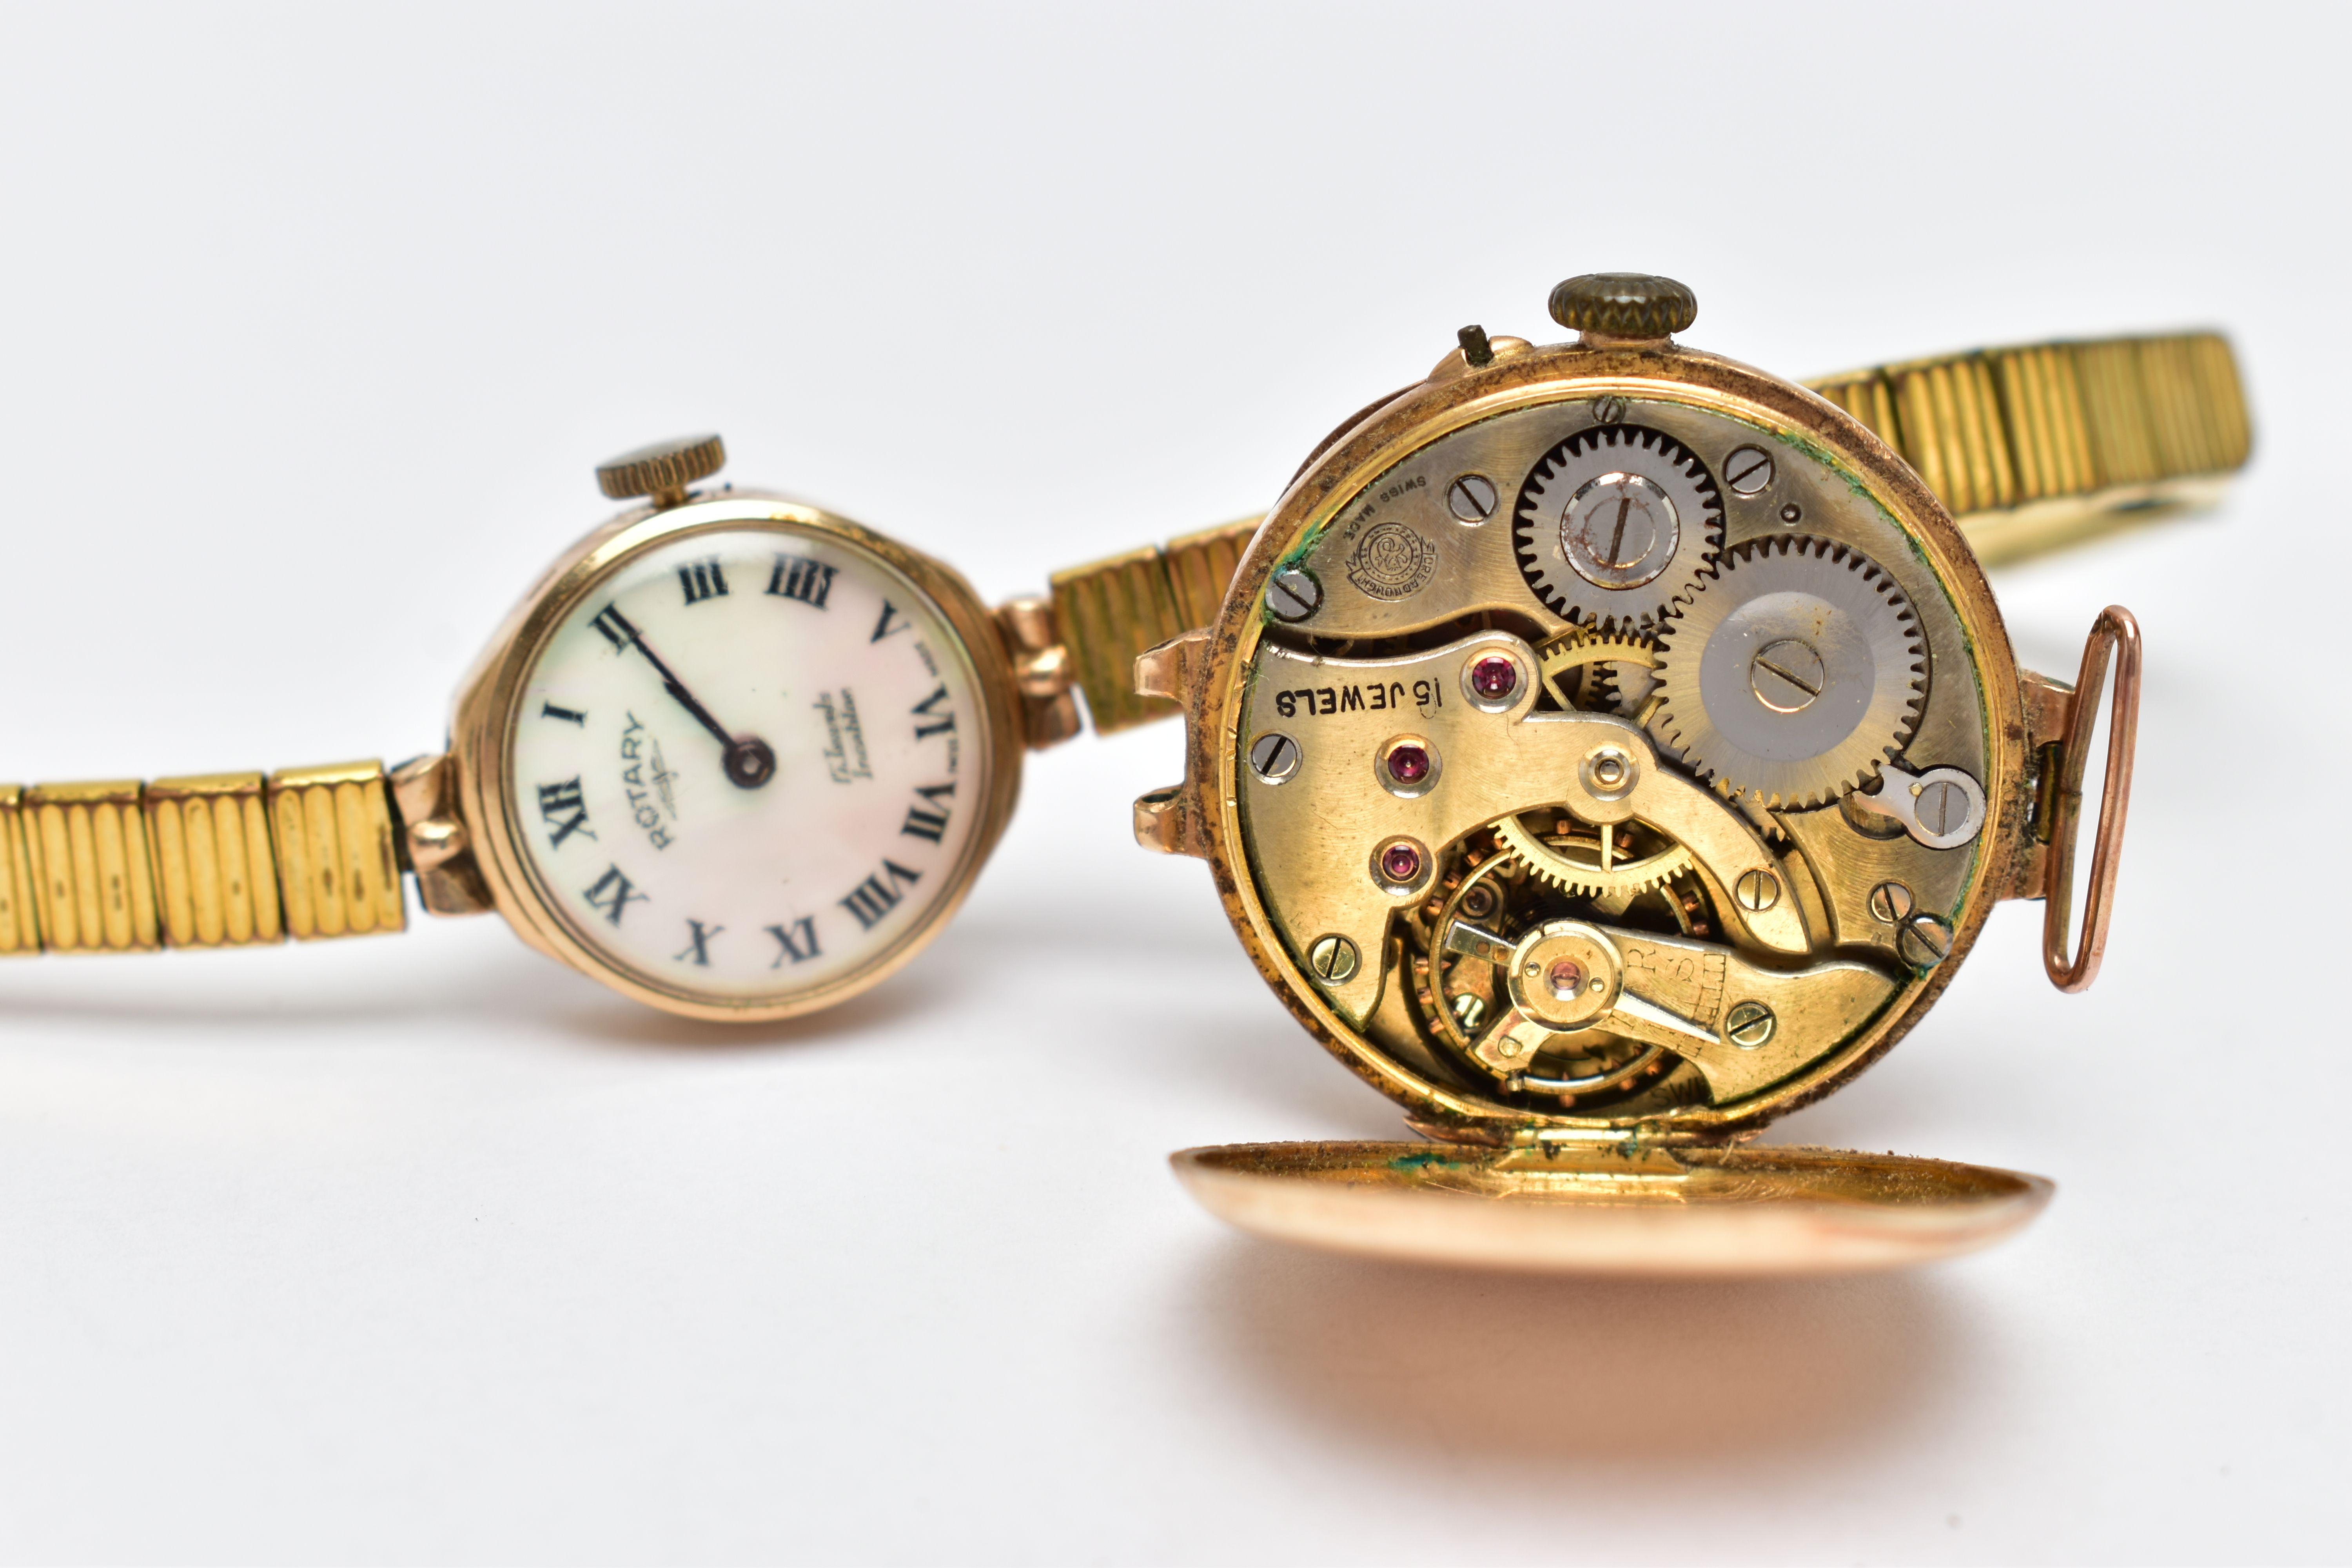 A LADY'S 9CT 'ROTARY' WRISTWATCH AND A 15CT GOLD WATCH, the lady's manual wind Rotary, with a - Image 4 of 5